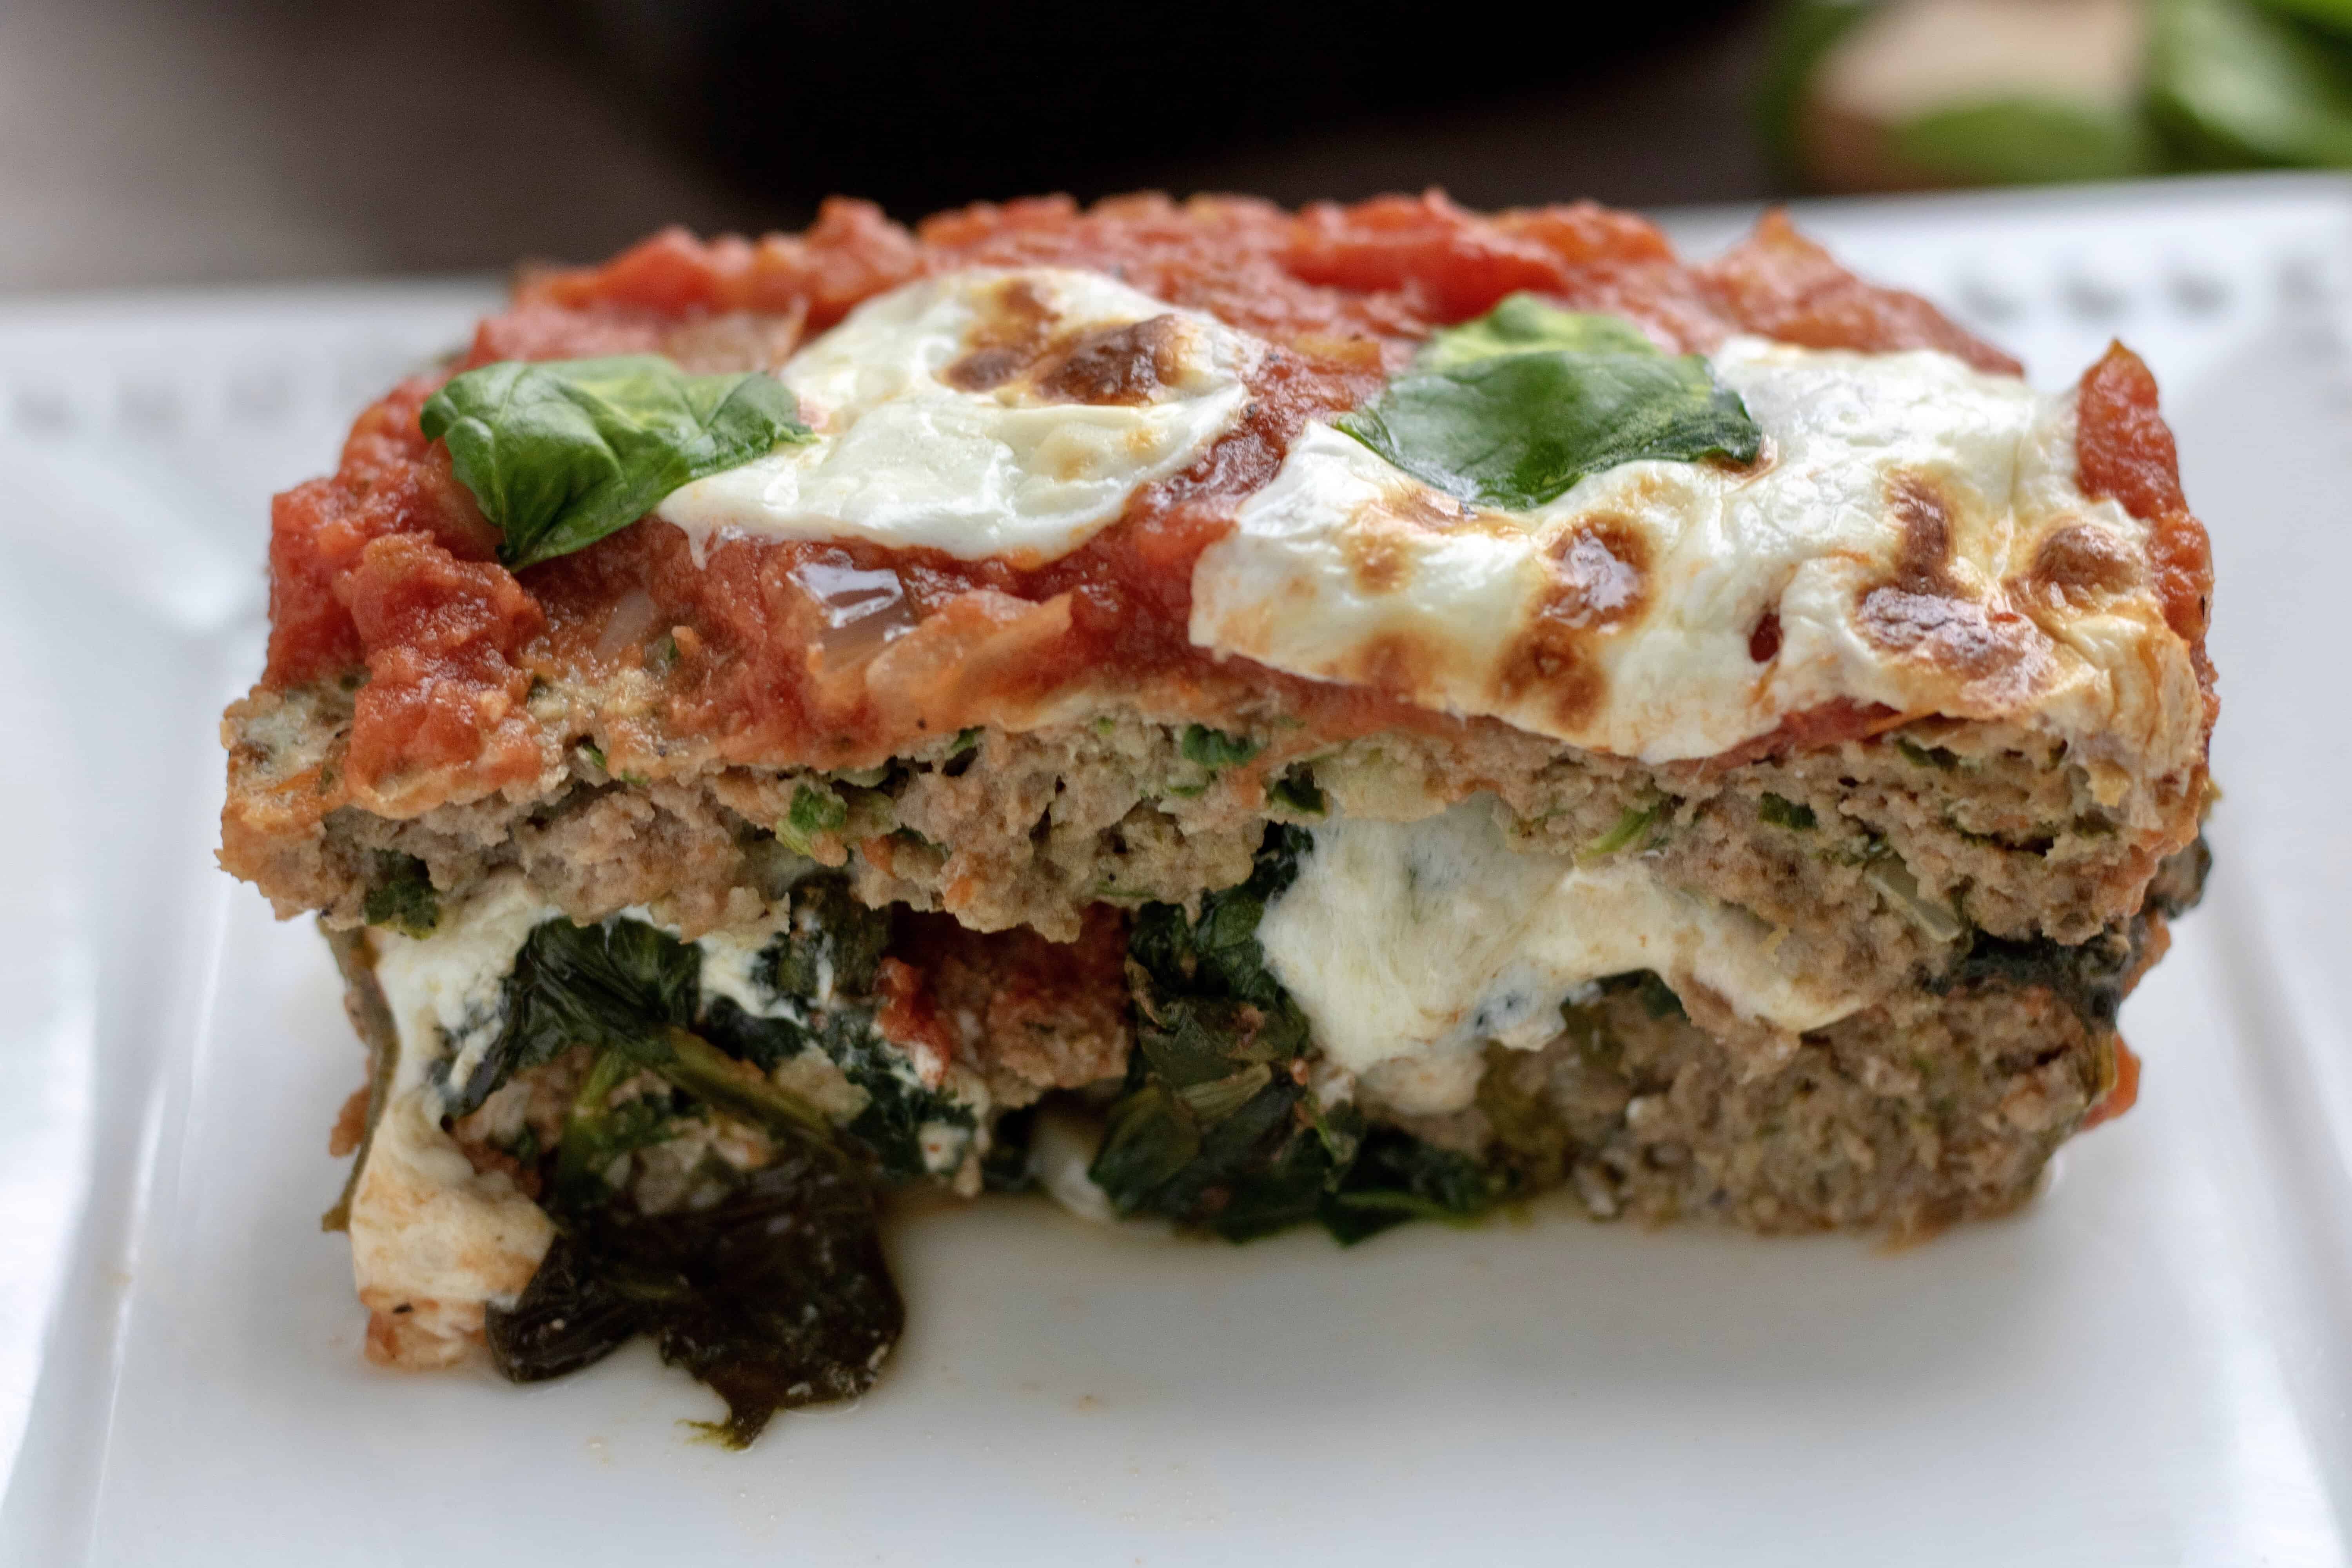 A white rectangle dish with a big slice of meatloaf. It’s made with ground chicken, fresh spinach and fresh mozzarella. It’s topped with marinara sauce for an easy Italian meatloaf recipe perfect for a healthy family dinner